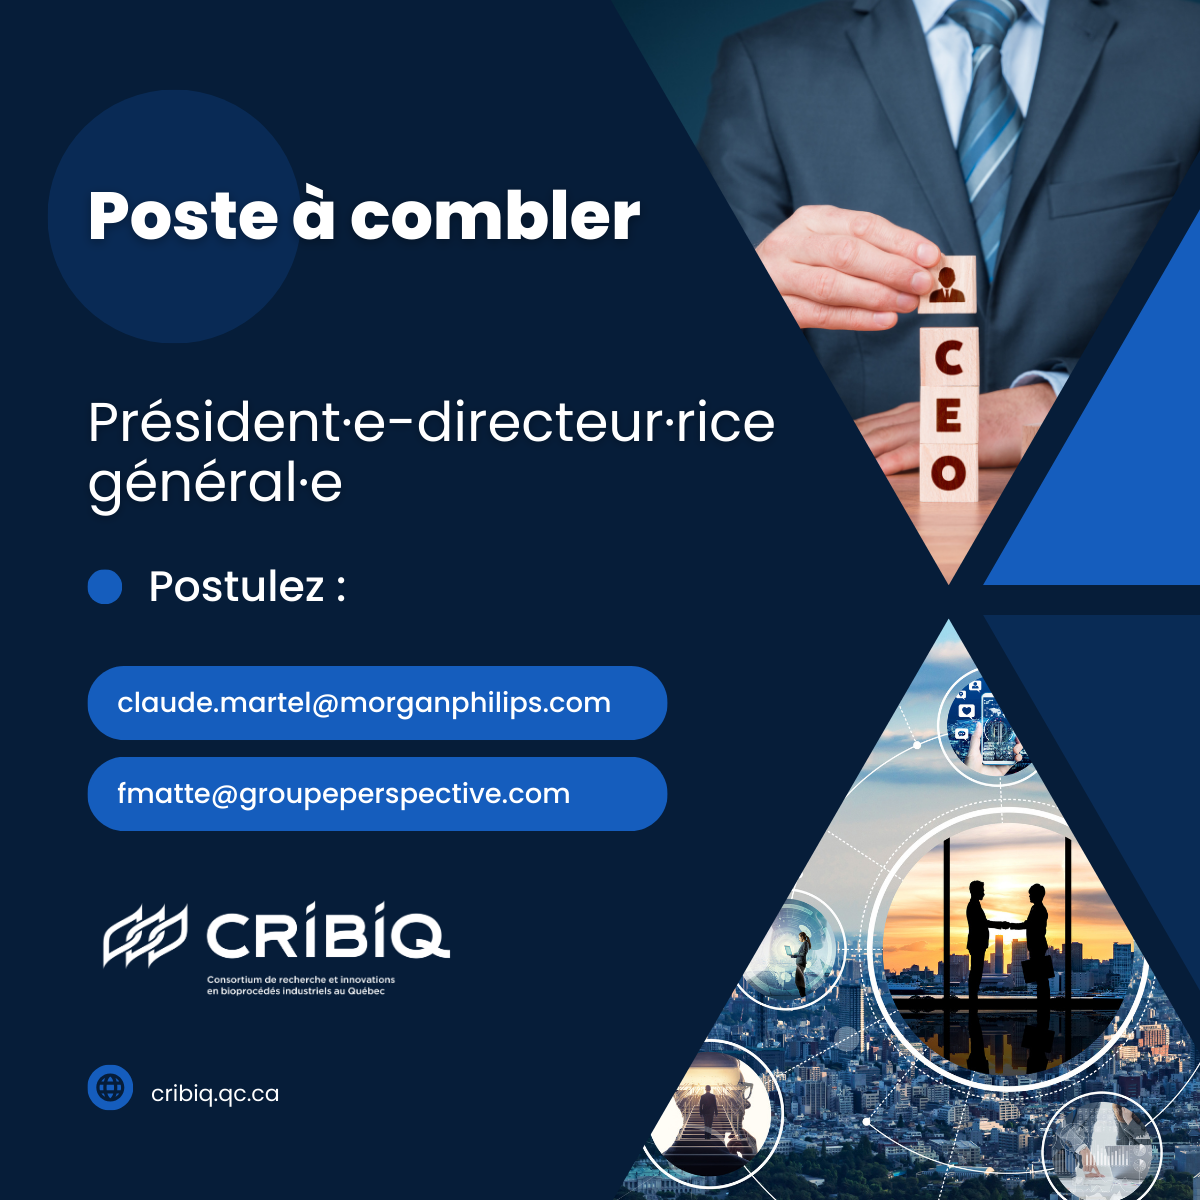 The CRIBIQ Is Seeking a Candidate for the Position of President-CEO